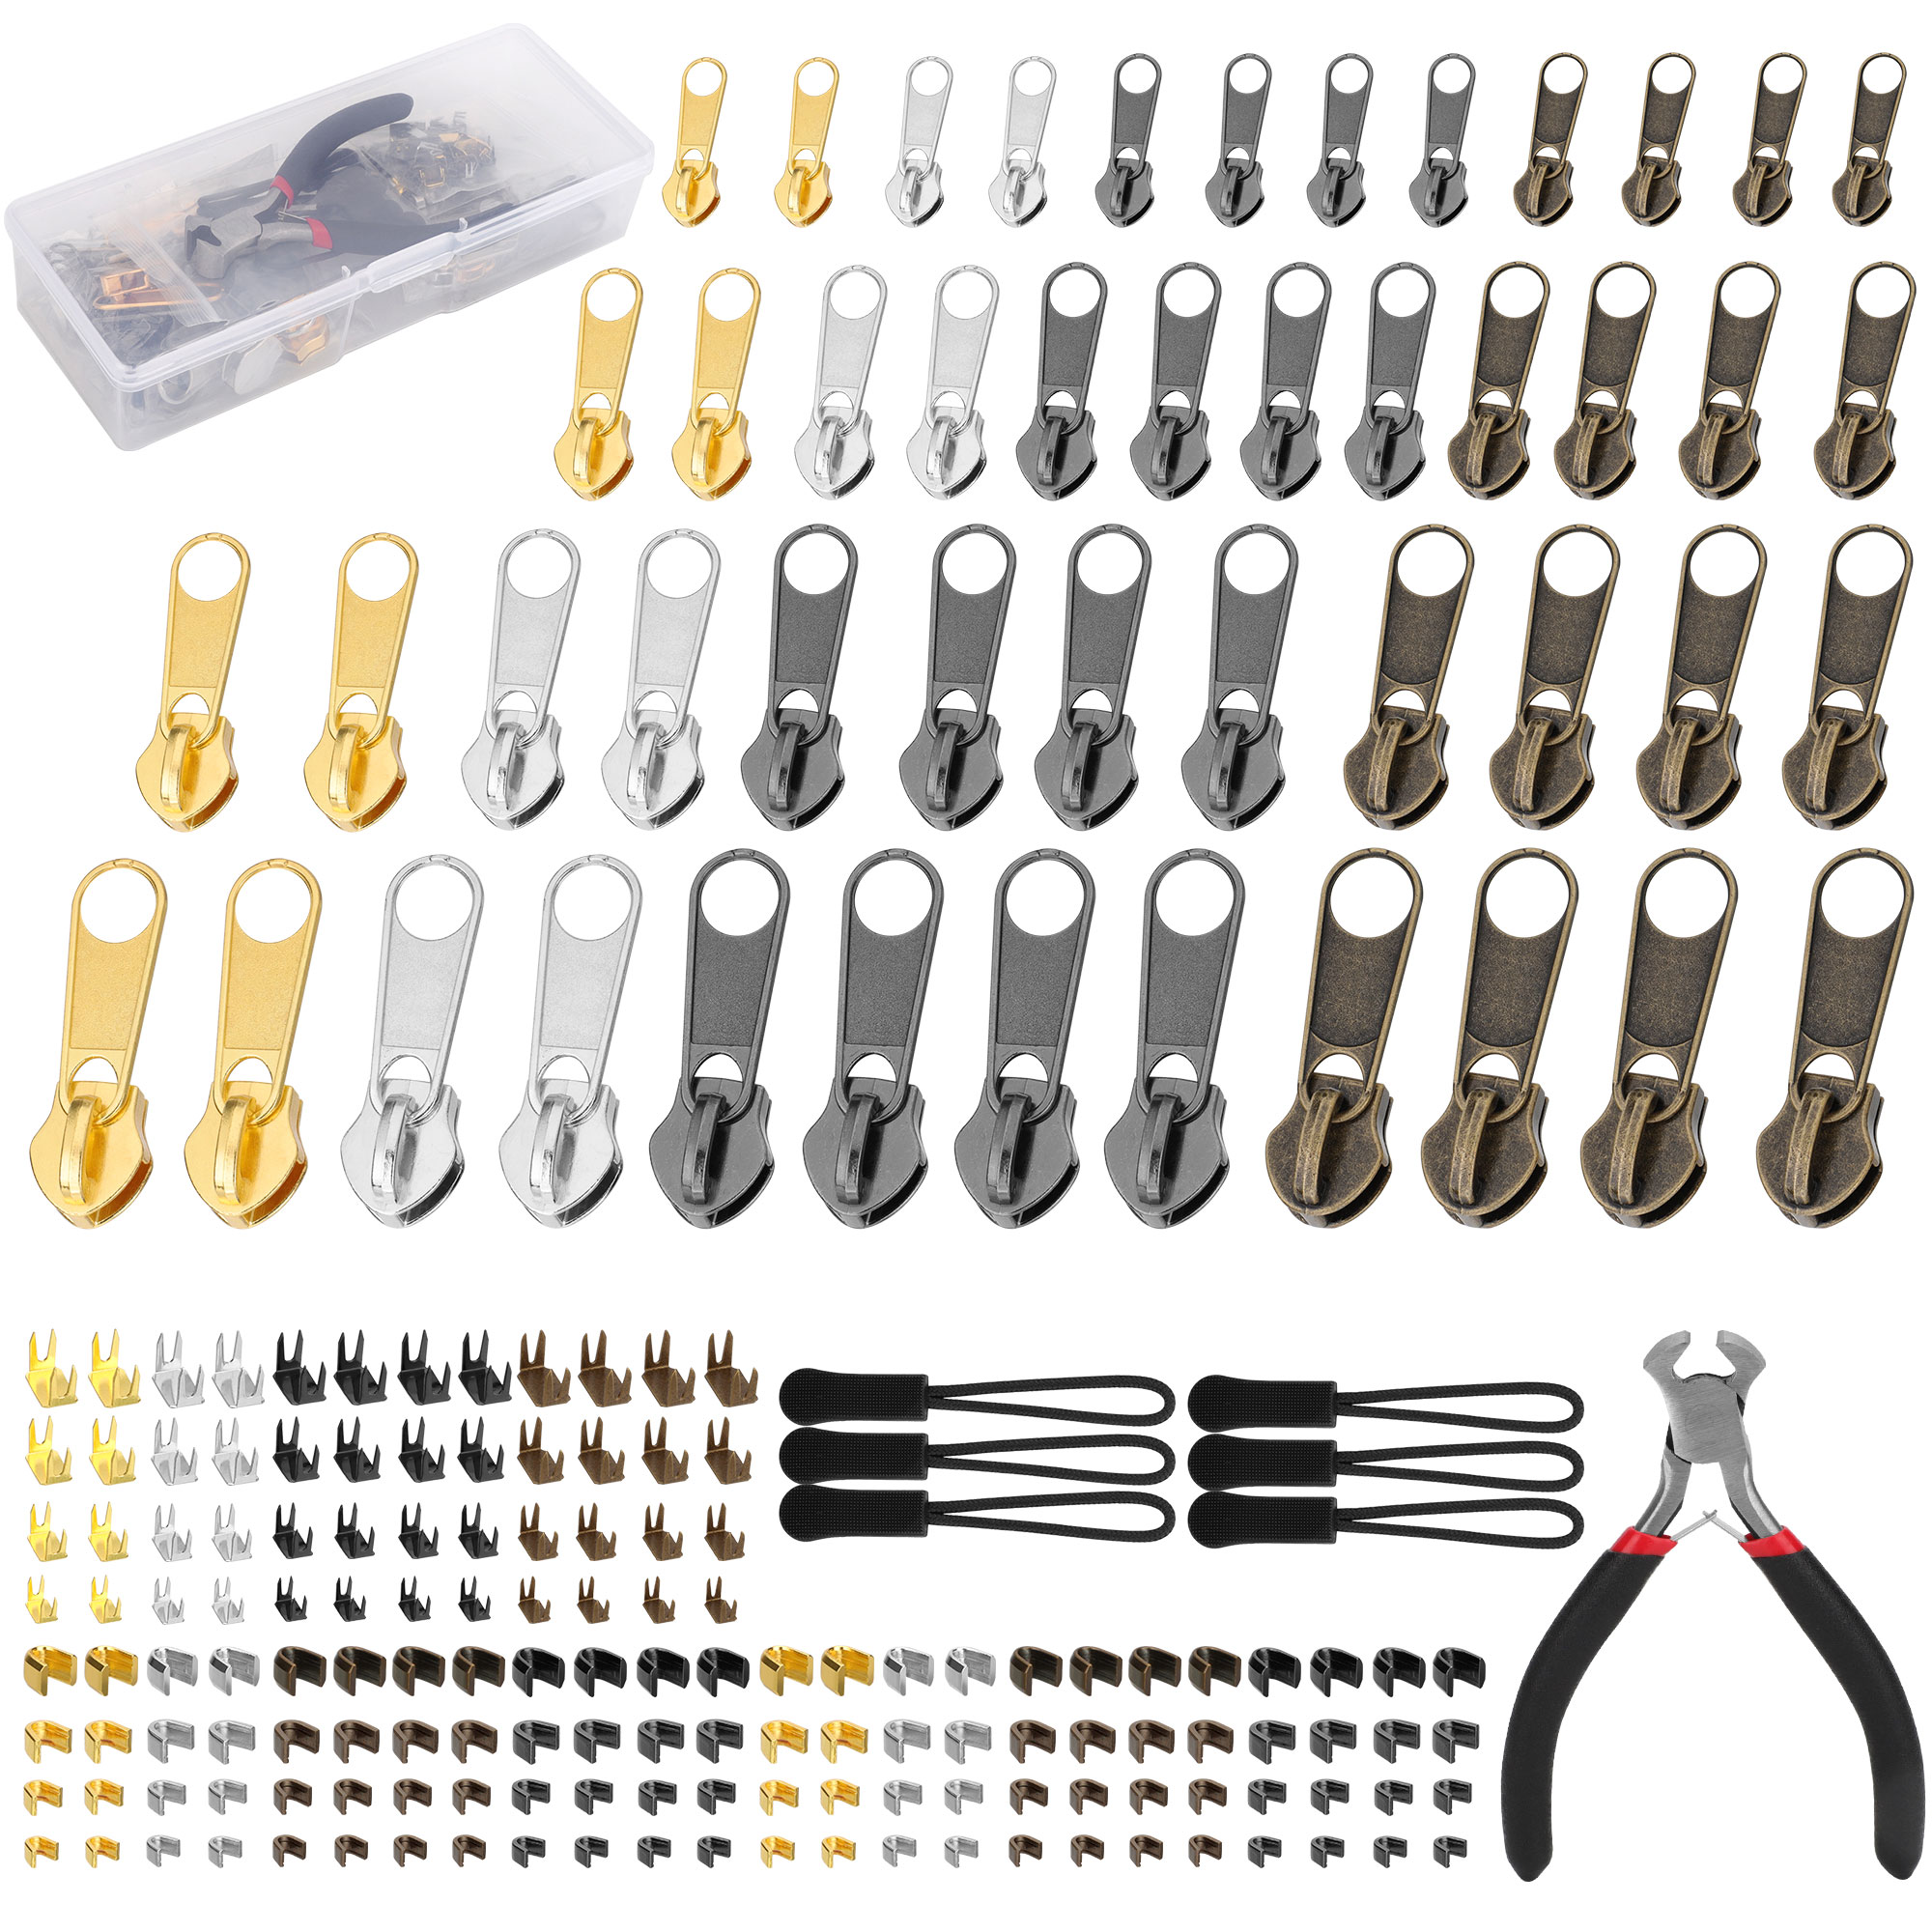 197pcs Zipper Repair Kit, TSV Zipper Fixing Replacement Set Includes  Install Plier with Case for Sewing